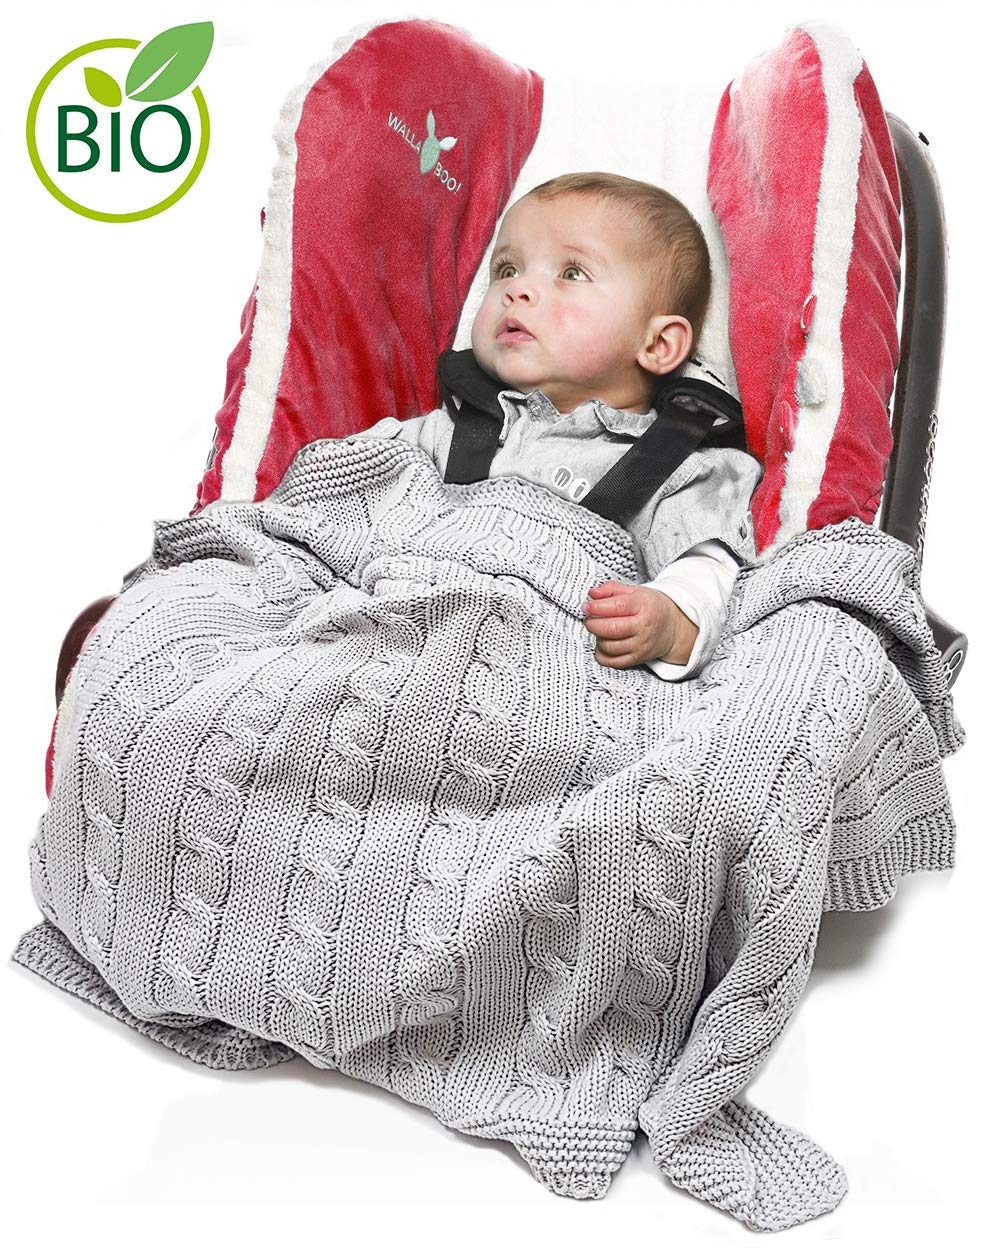 Wallaboo Noa Baby Blanket Knitted Blanket Made of 100% Organic Cotton 70 x 90 cm Made in Germany